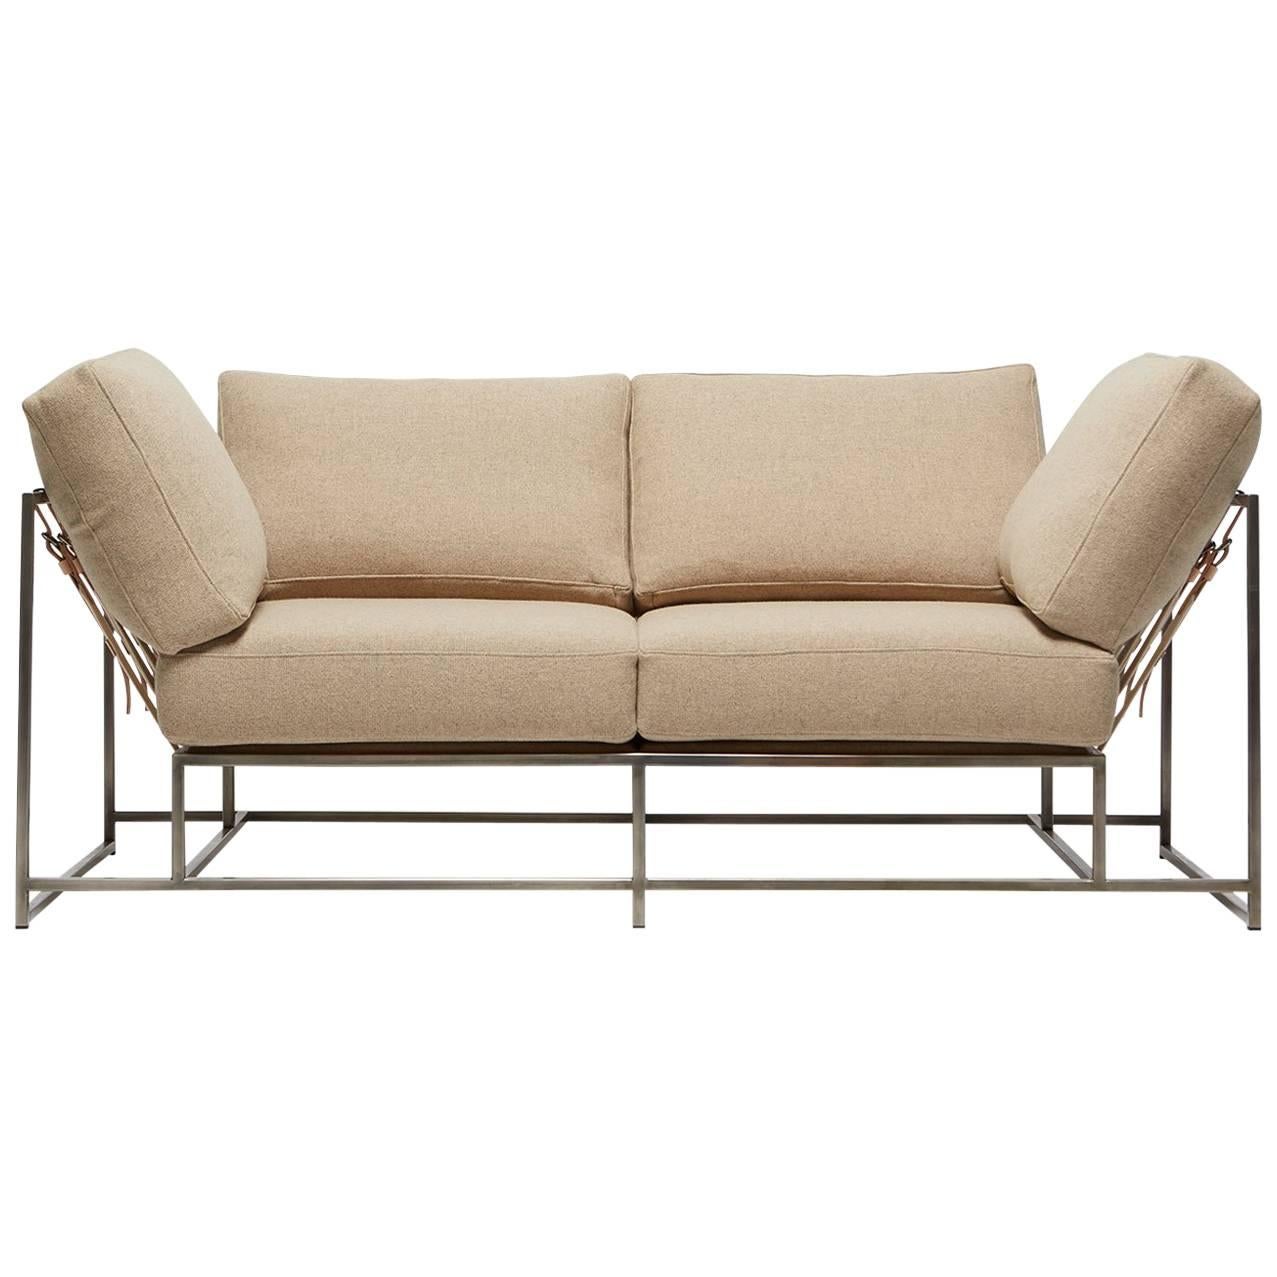 Tan Wool and Antique Nickel Two-Seat Sofa